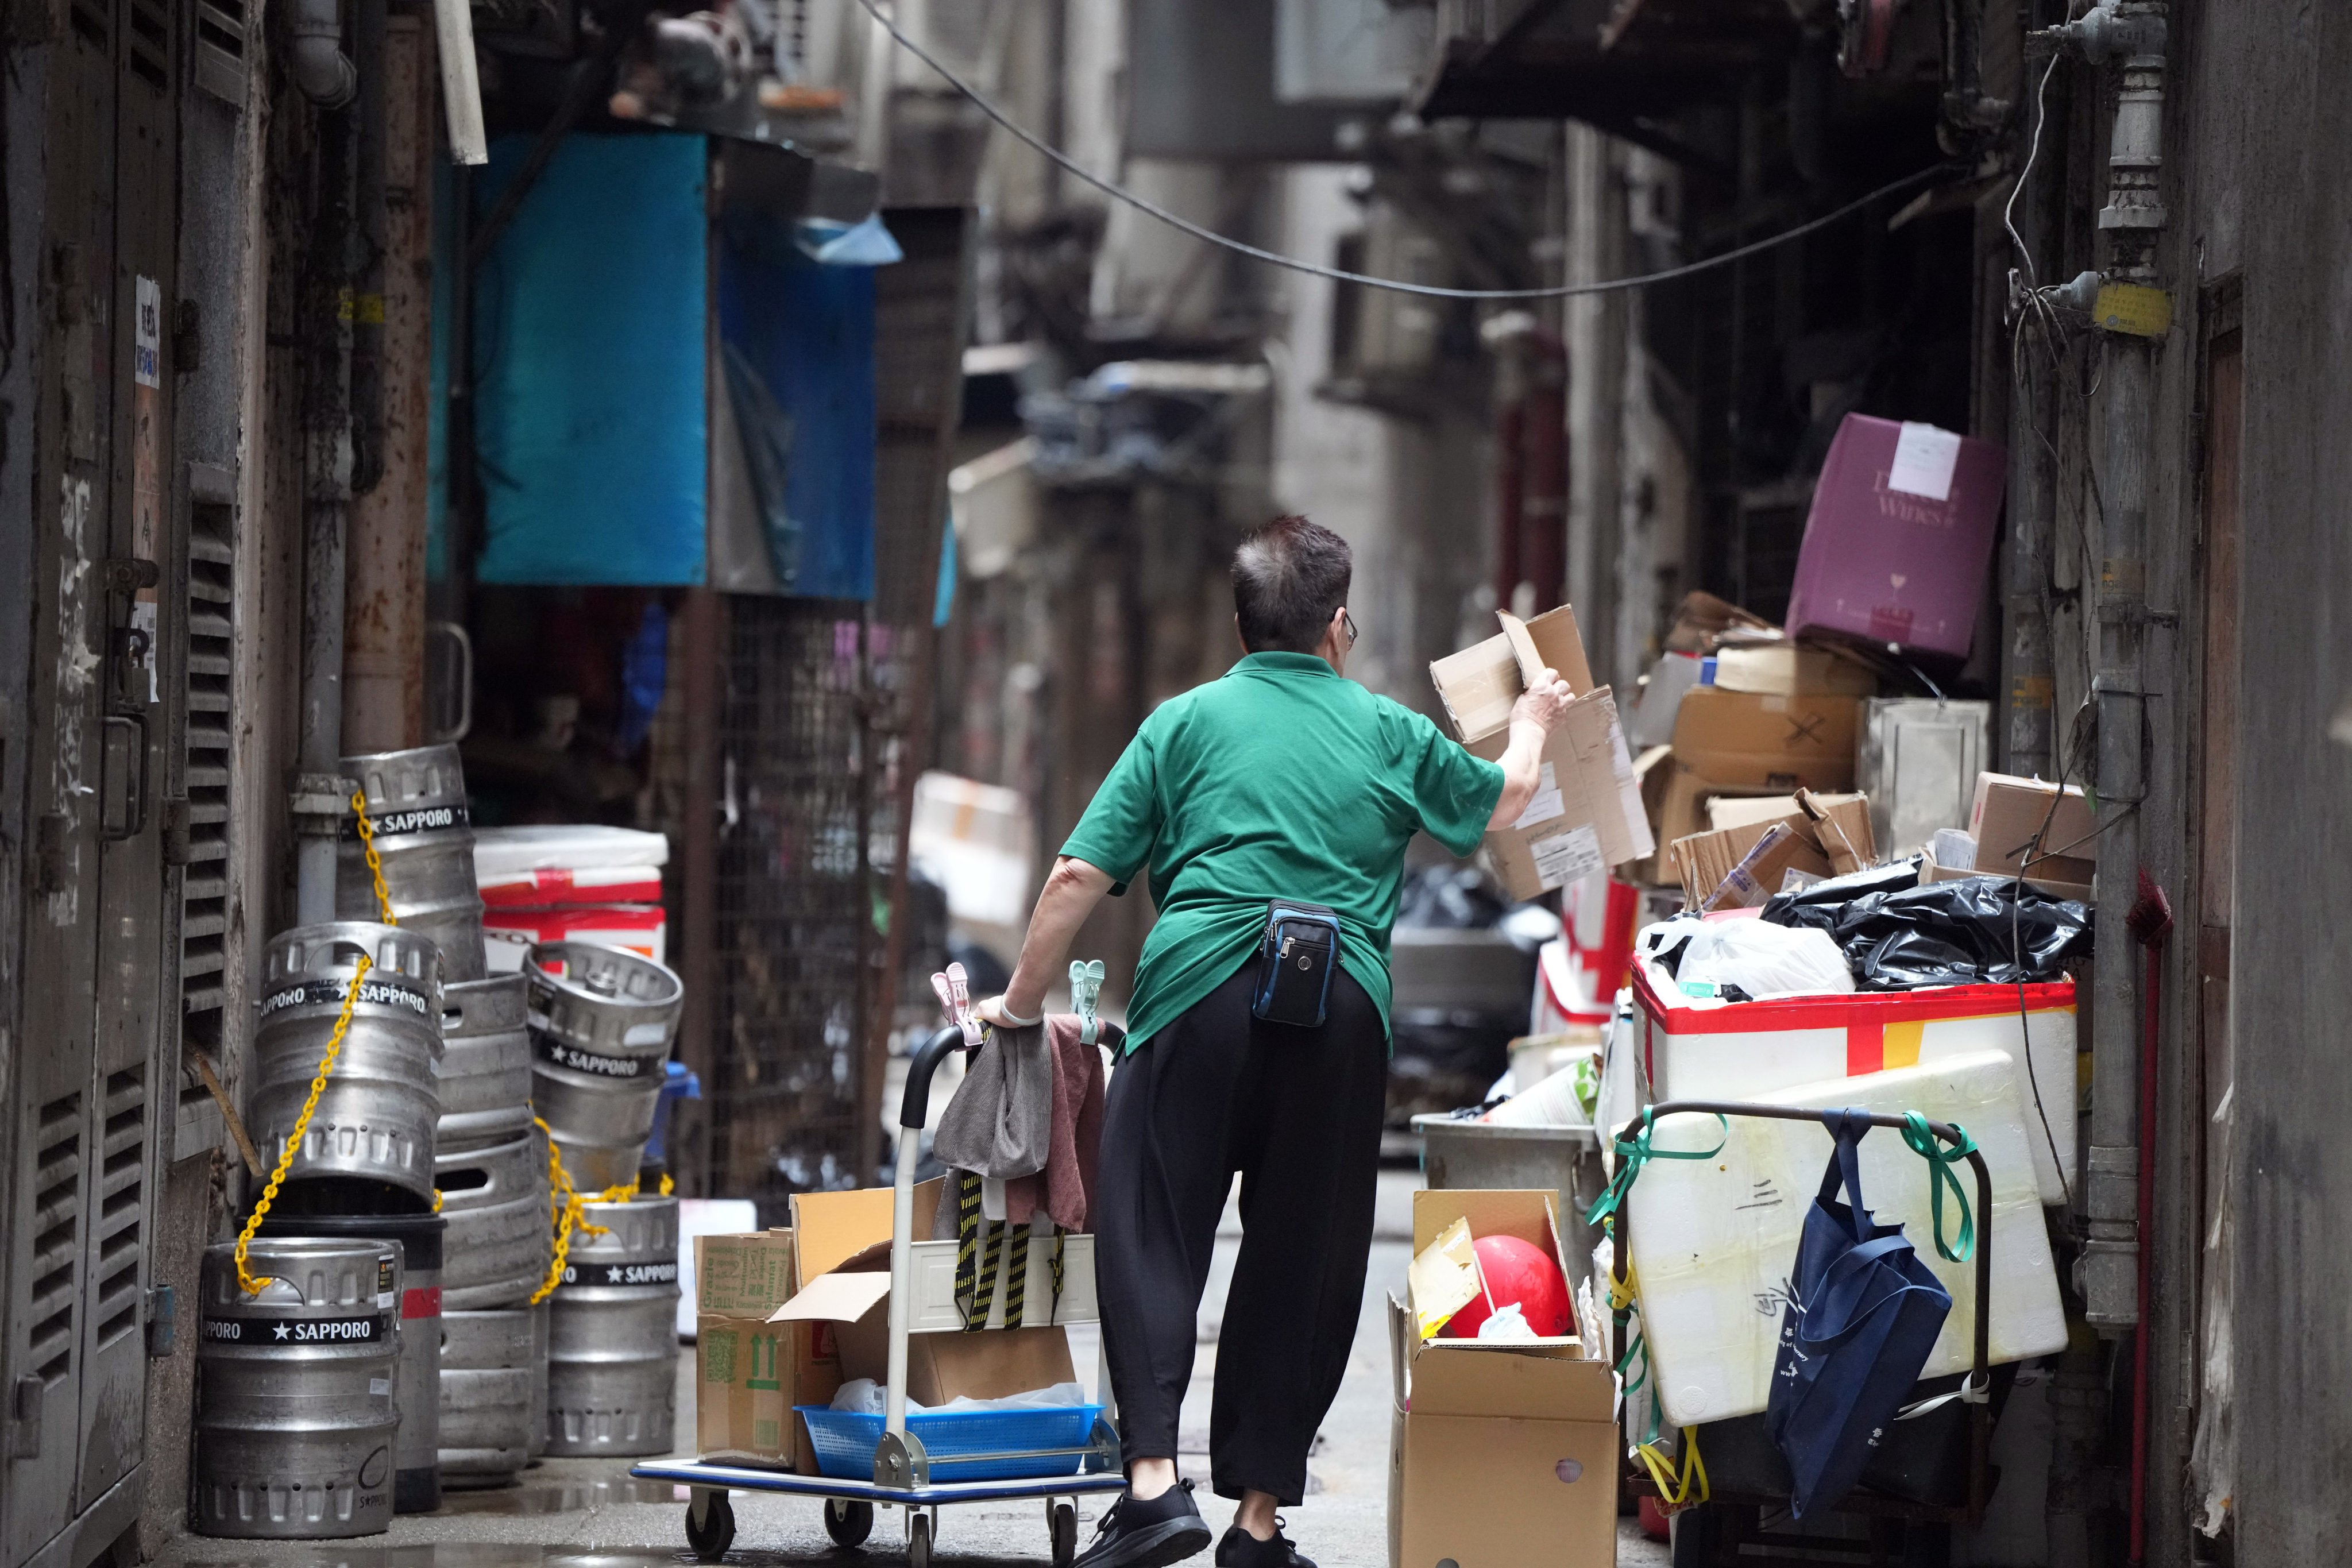 A cleaner working in a back alley in Hong Kong’s Wan Chai district on April 29. Hong Kong should support cleaners’ work by giving them the space and facilities needed to collect, separate and sell recyclable material. Photo: Sam Tsang